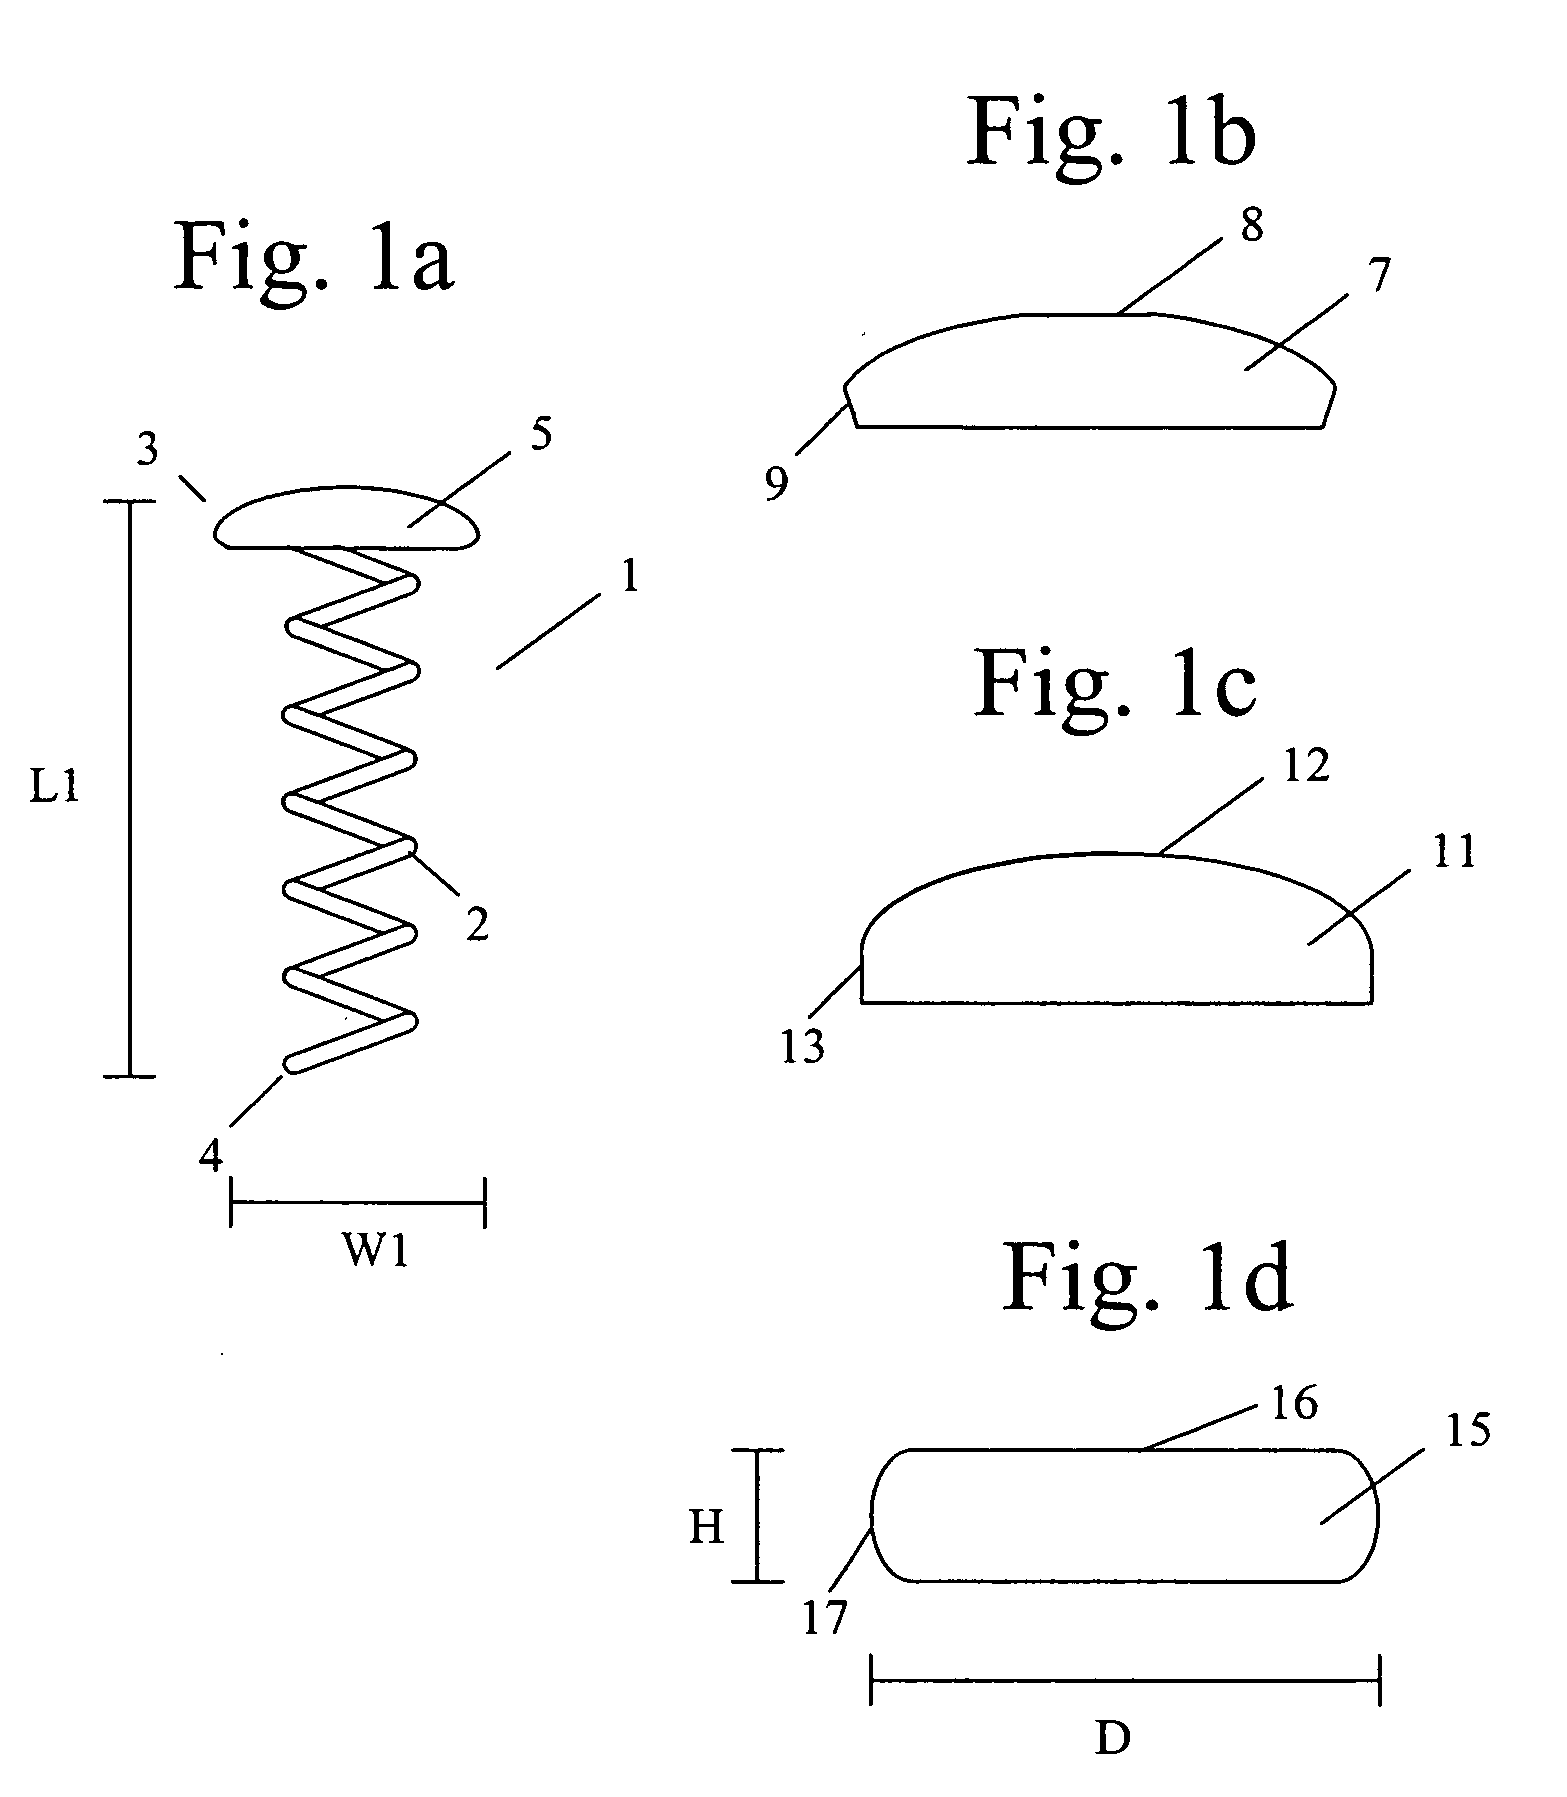 Insertion instrument for non-linear medical devices